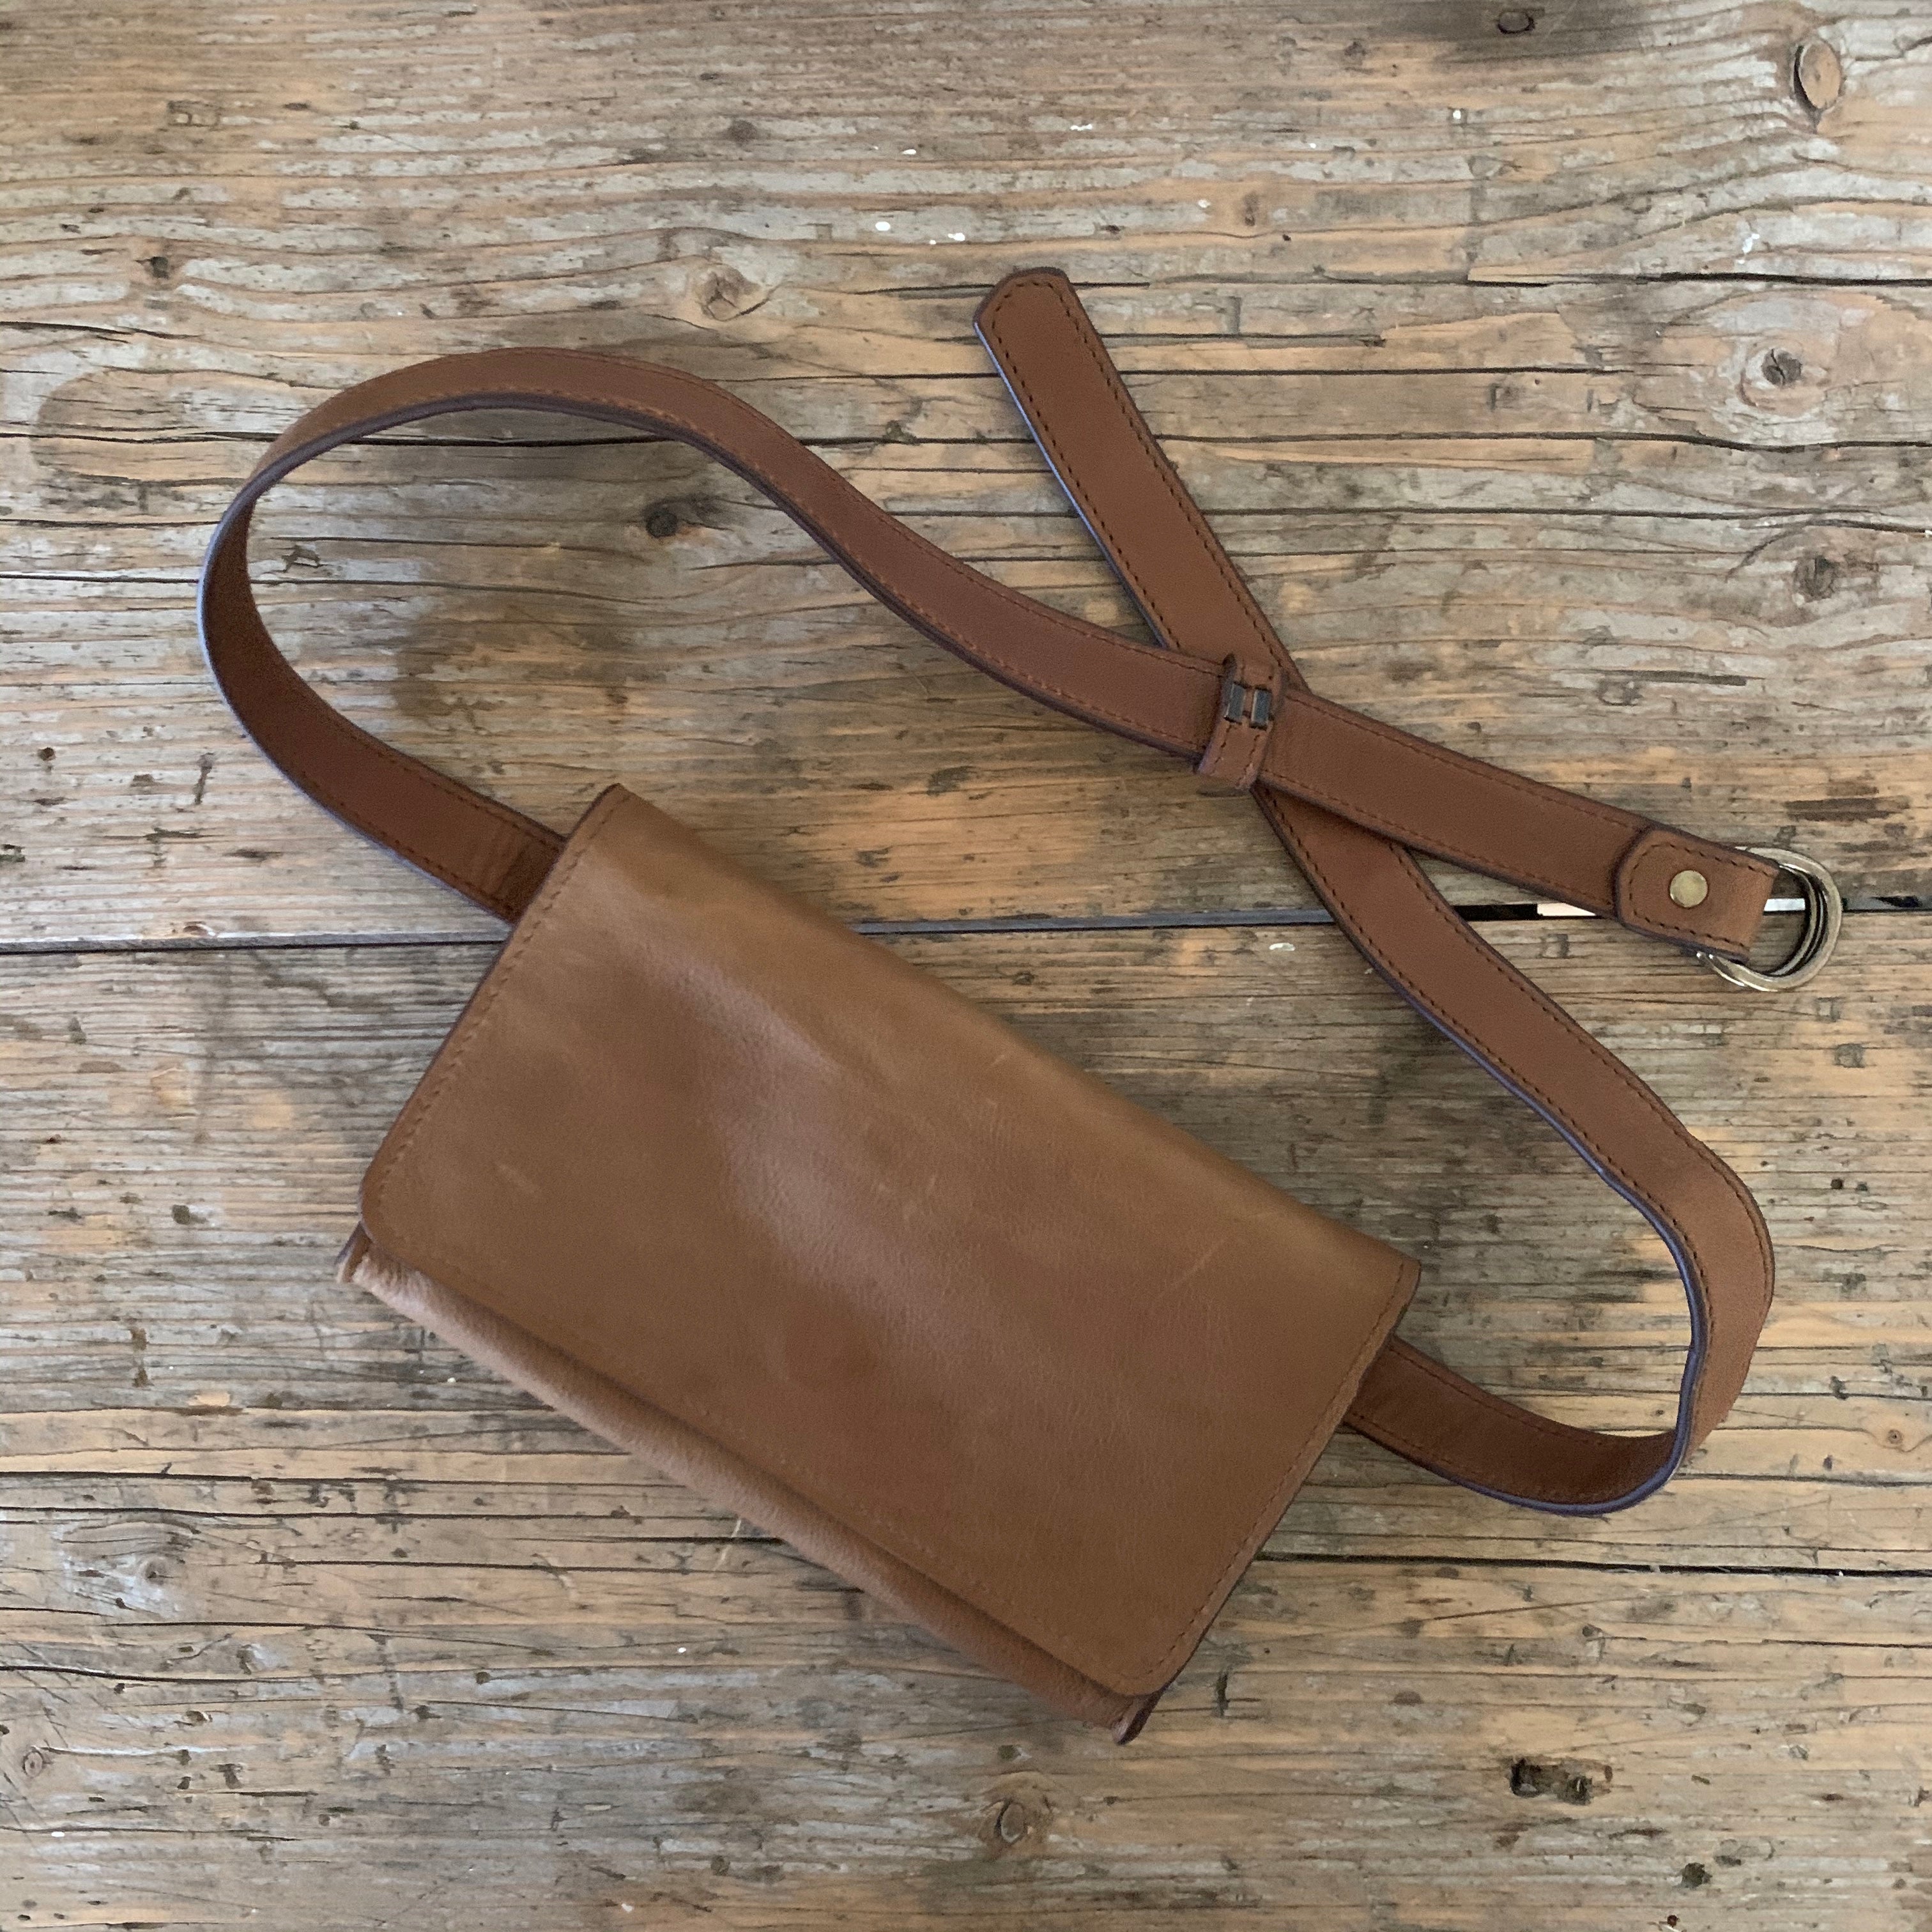 LL reclaimed leather hip pouch